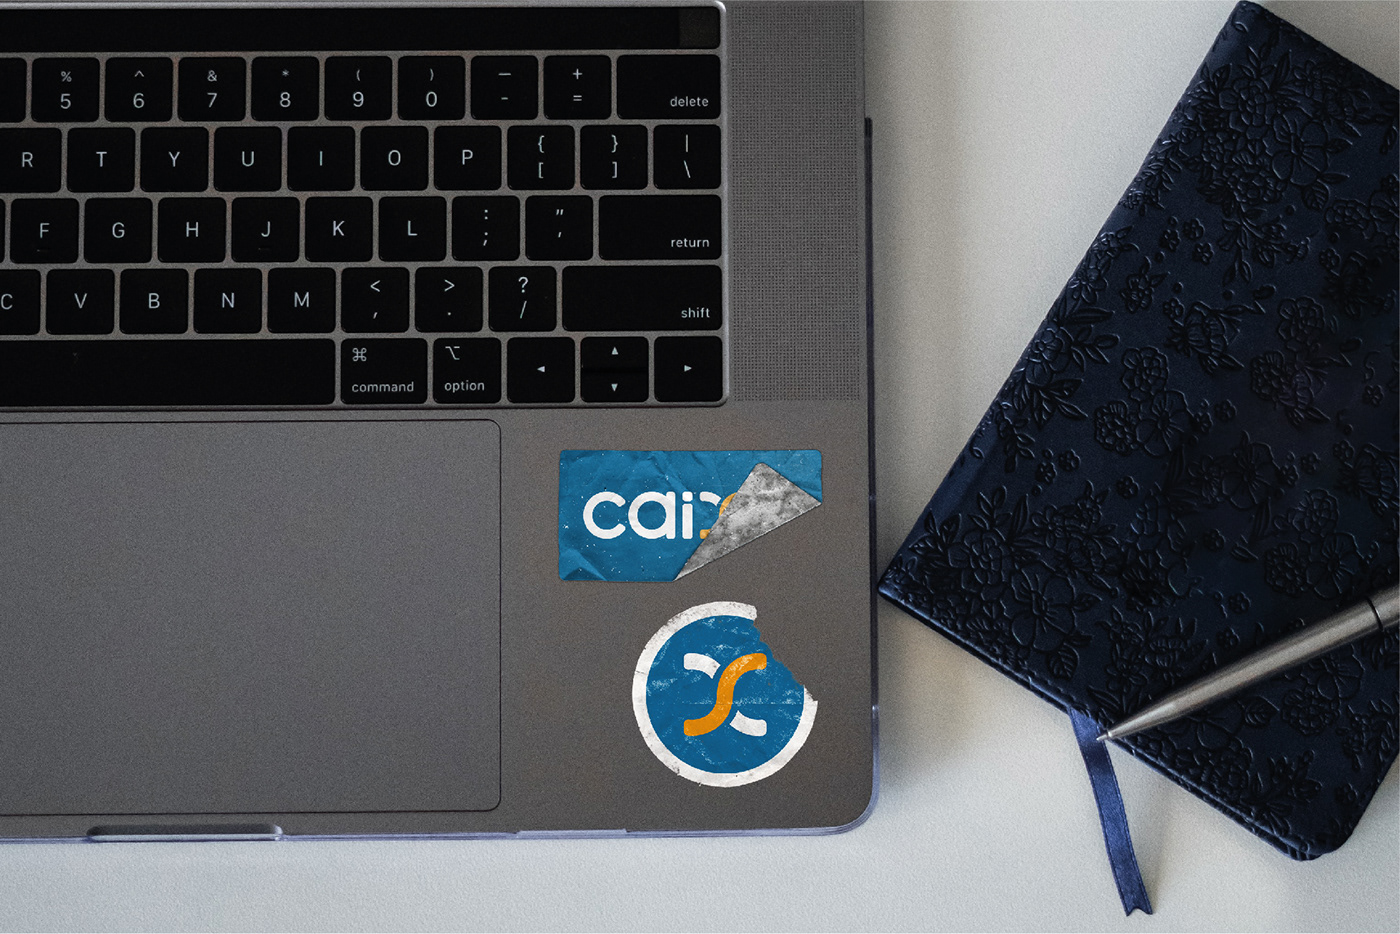 Caixa's stickers in a Macbook, the stickers are bruised and look old